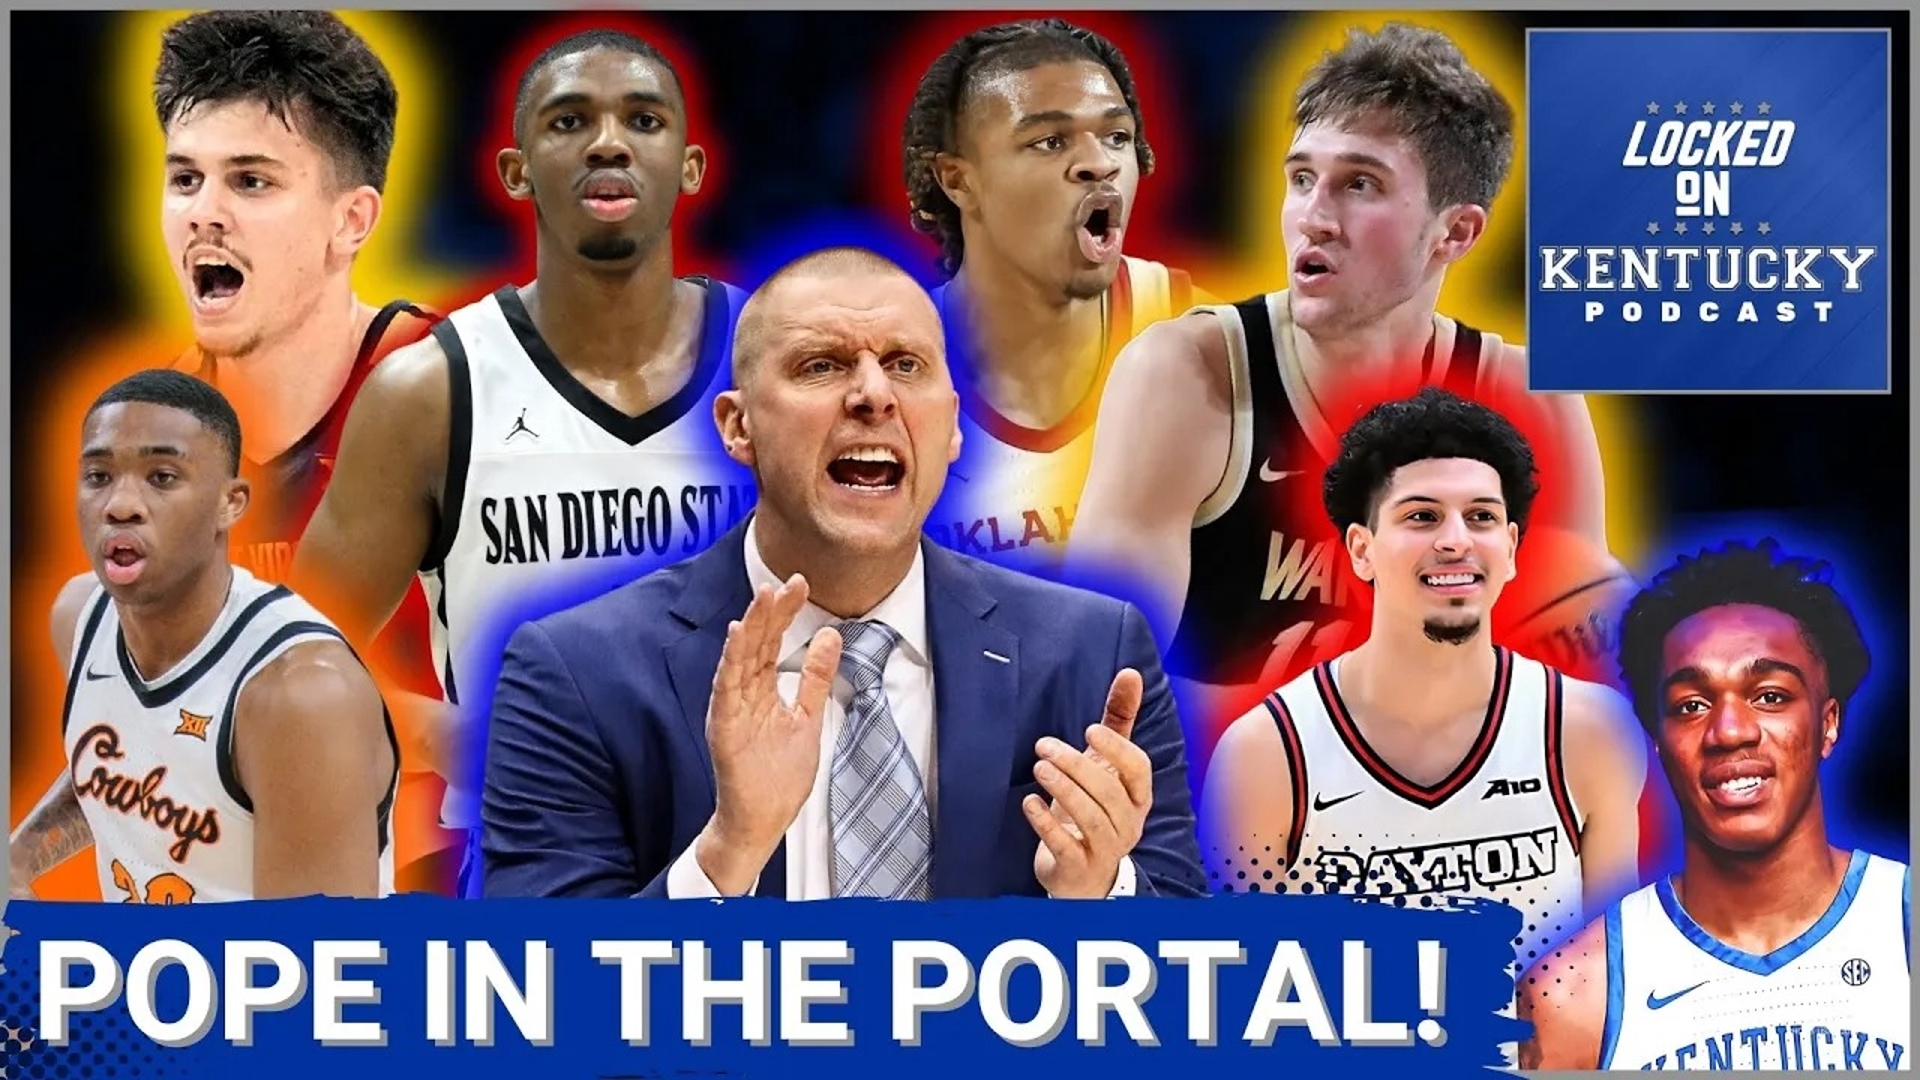 Kentucky basketball has a nearly complete roster thanks to amazing work in the transfer portal from Mark Pope. What else do the Wildcats need to add?